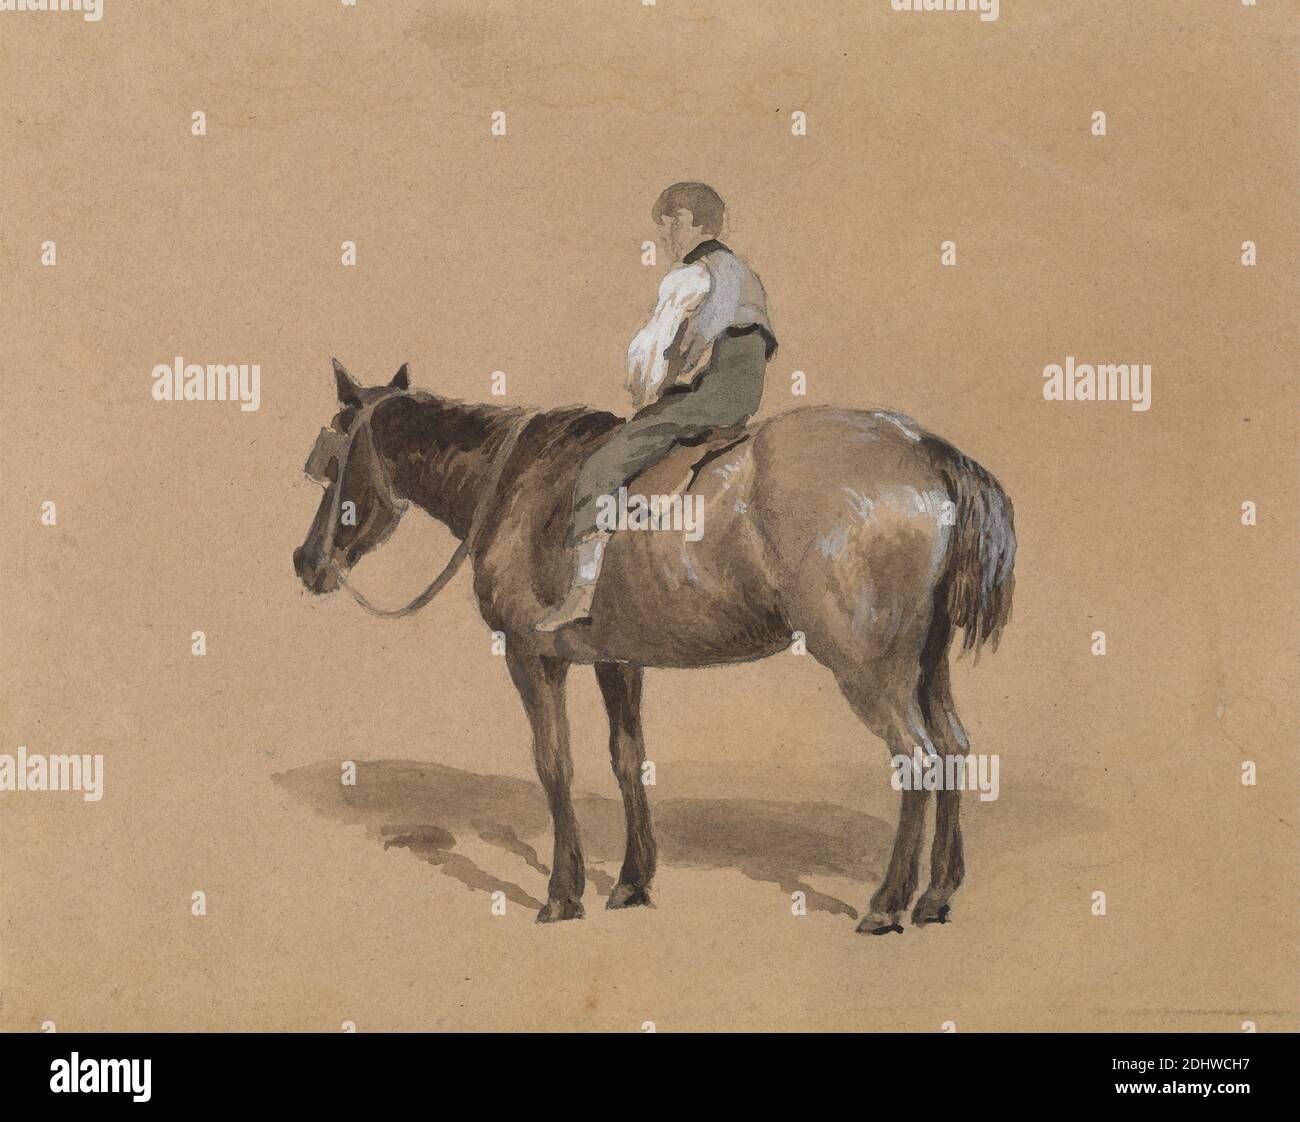 Stable Boy on a Pony, Arthur James Stark, 1831–1902, British, undated, Watercolor, gouache, and graphite on medium, smooth, beige wove paper, Sheet: 5 1/2 × 6 7/8 inches (14 × 17.5 cm), animal art, boy, bridle, horse (animal), pony (animal), reins, saddle, sporting art, vest Stock Photo